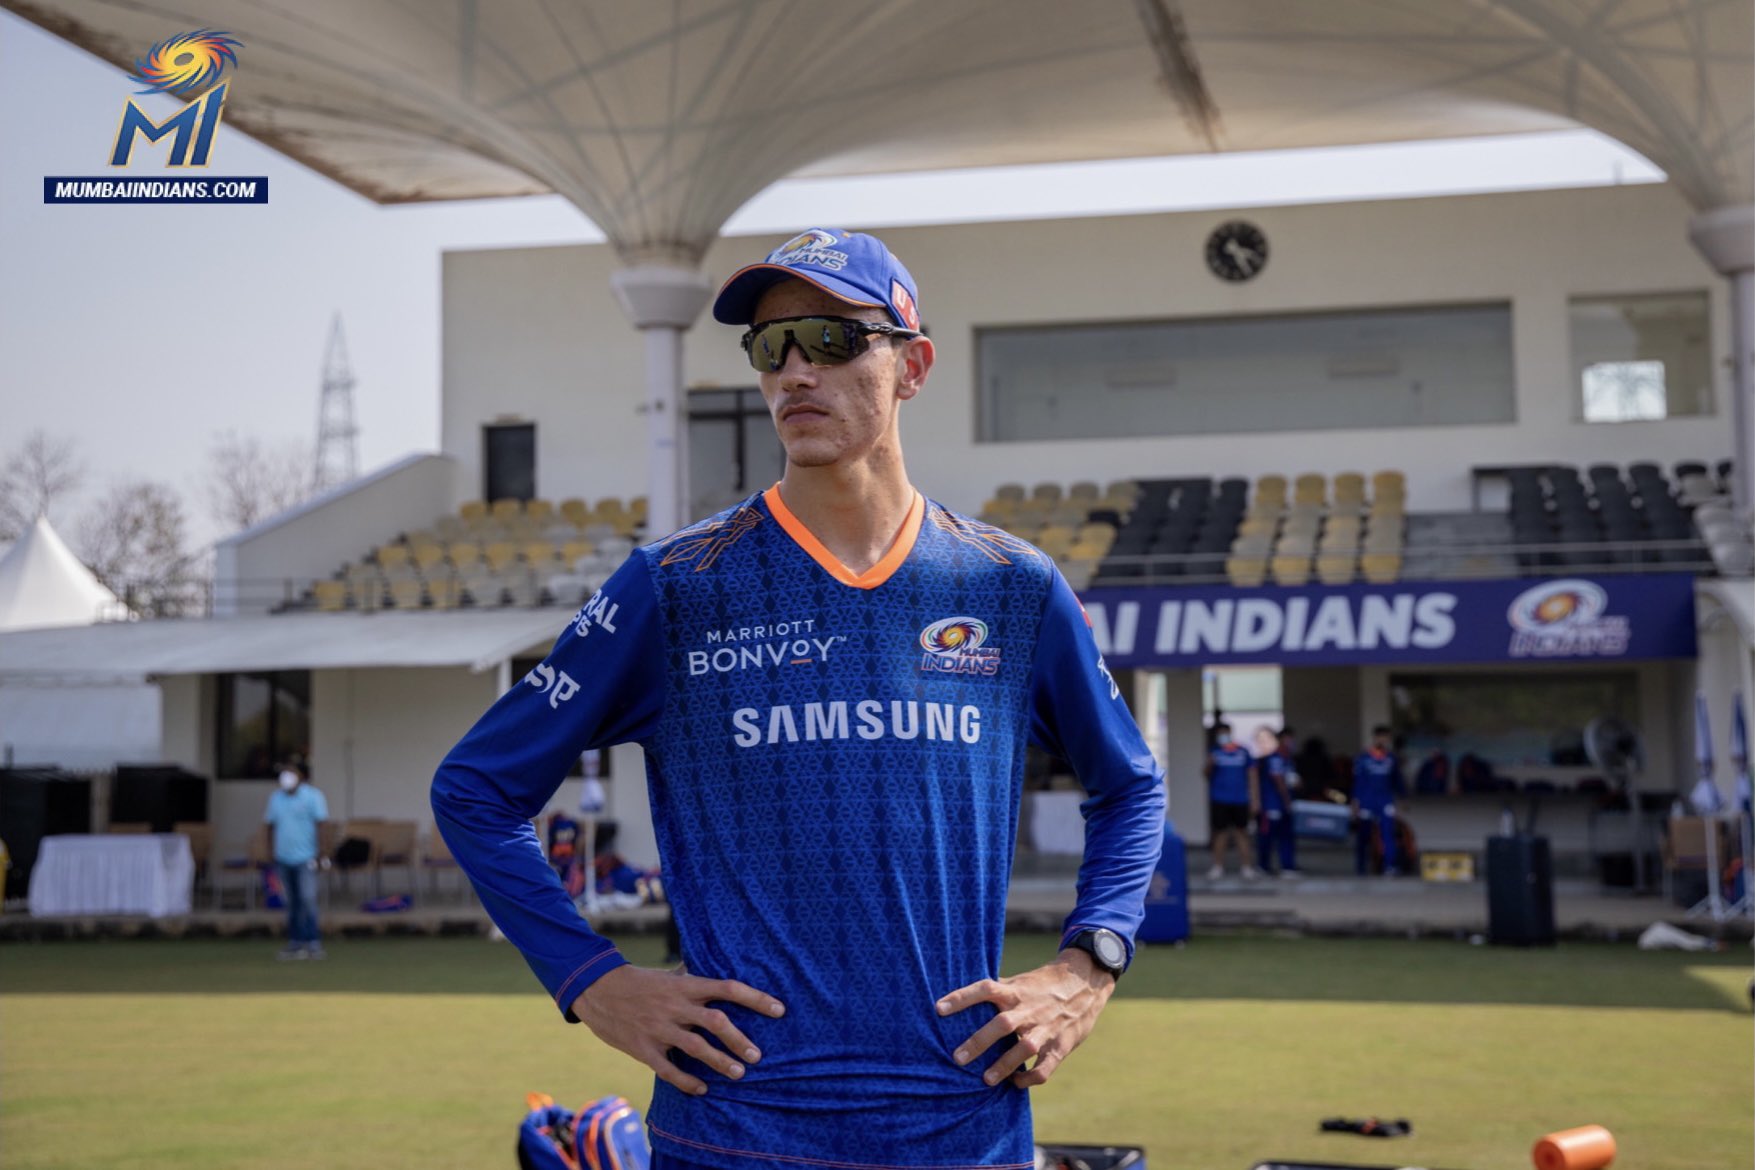 mi makes marco jansen to debut in first match against rcb